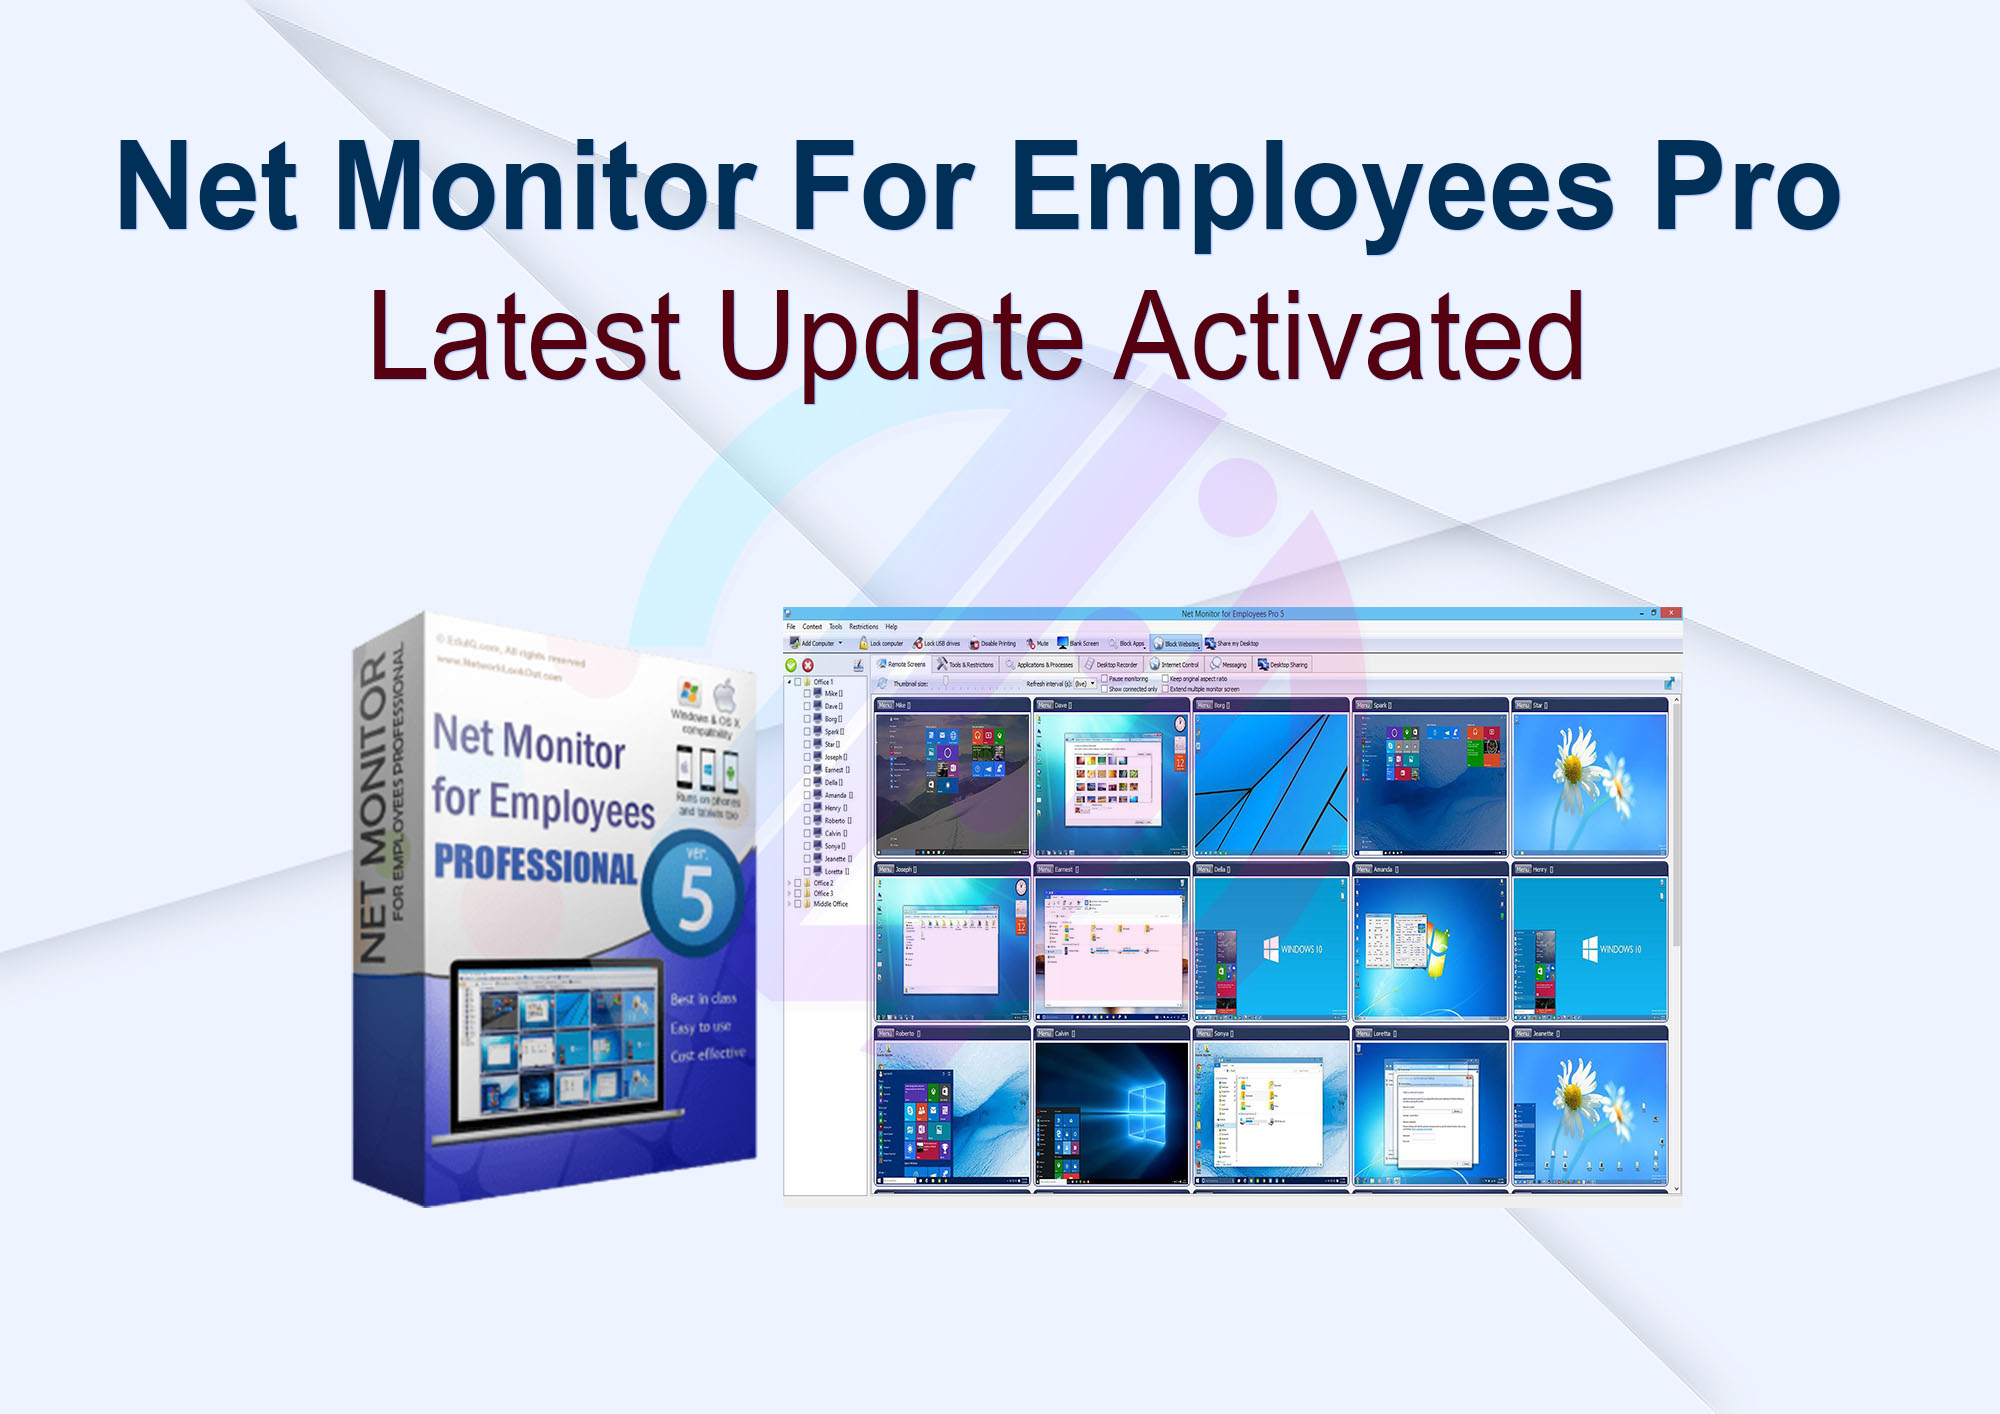 net monitor for employees professional download full version with crack